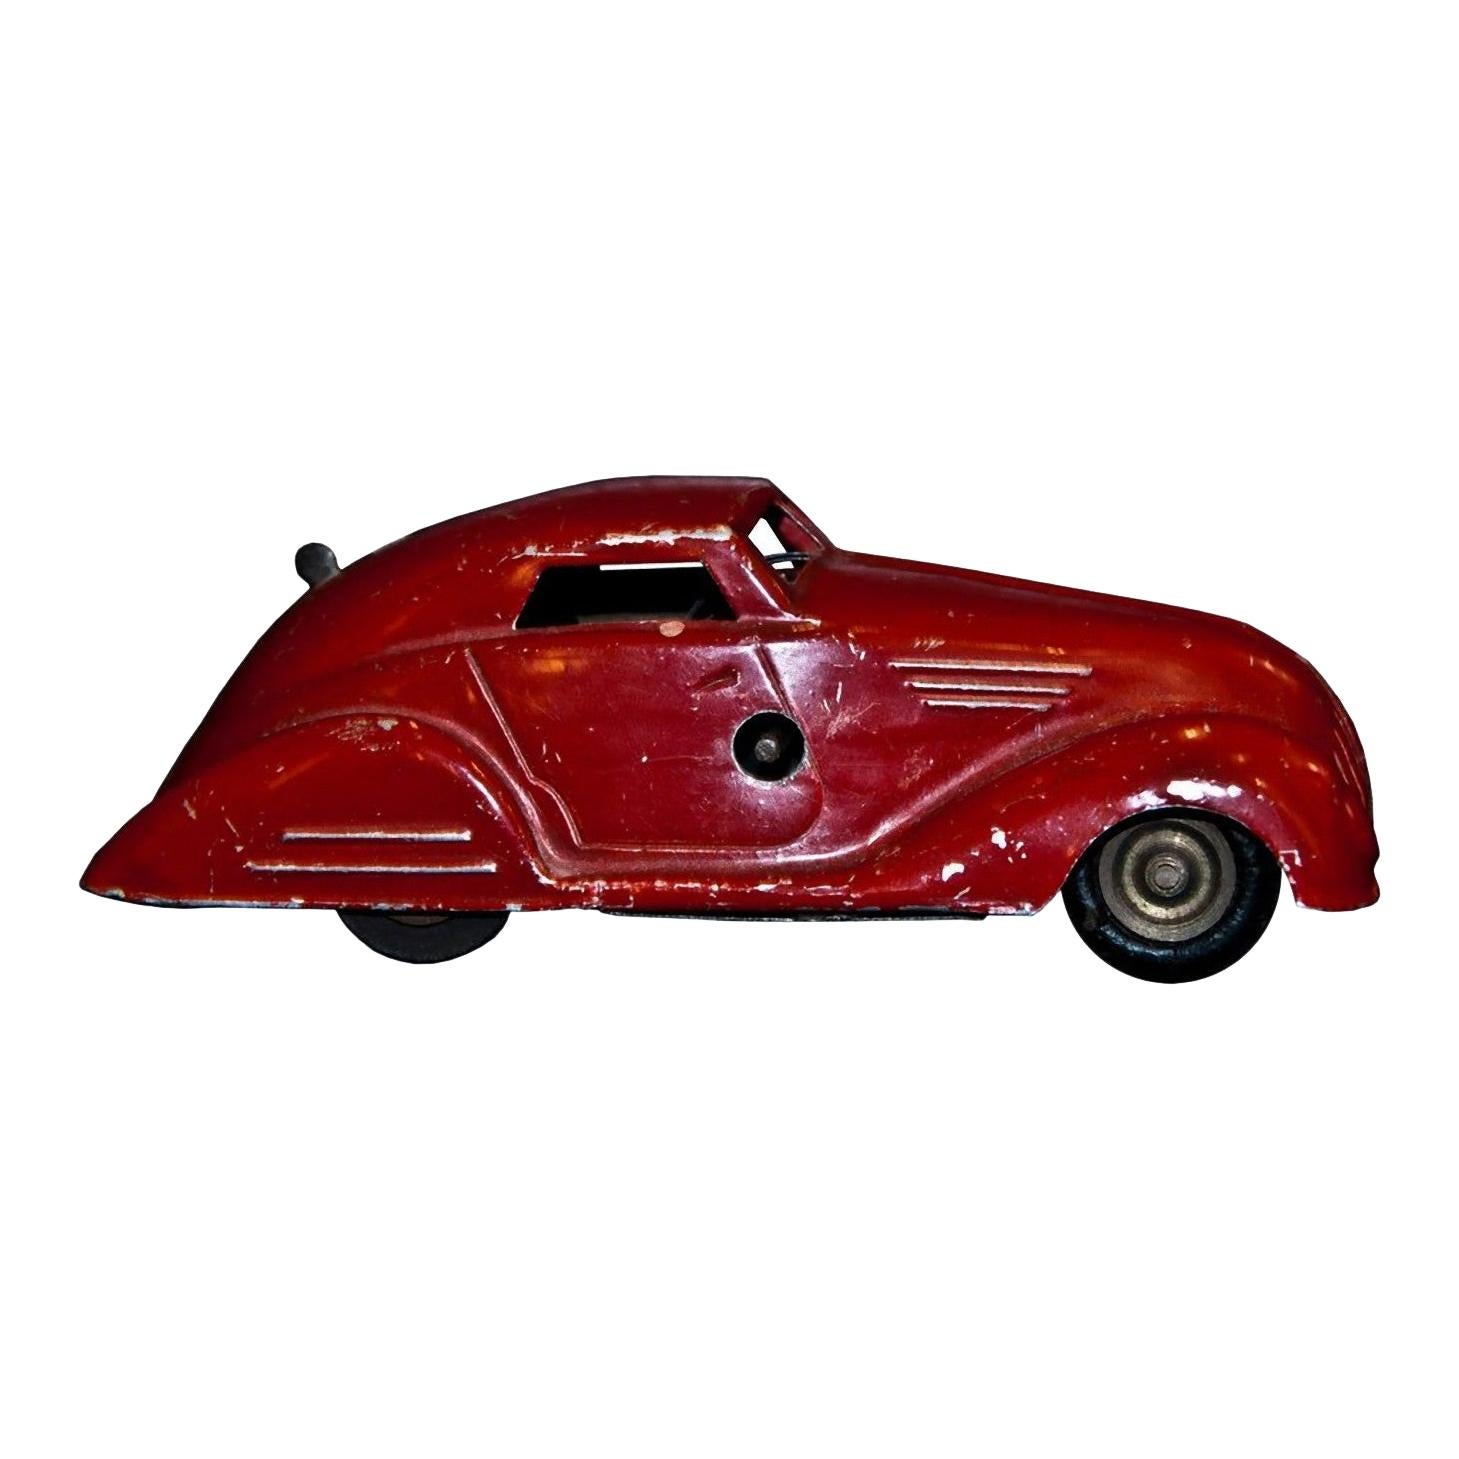 Vintage Toy Car, Wind Up Red Car, Early 20th Century